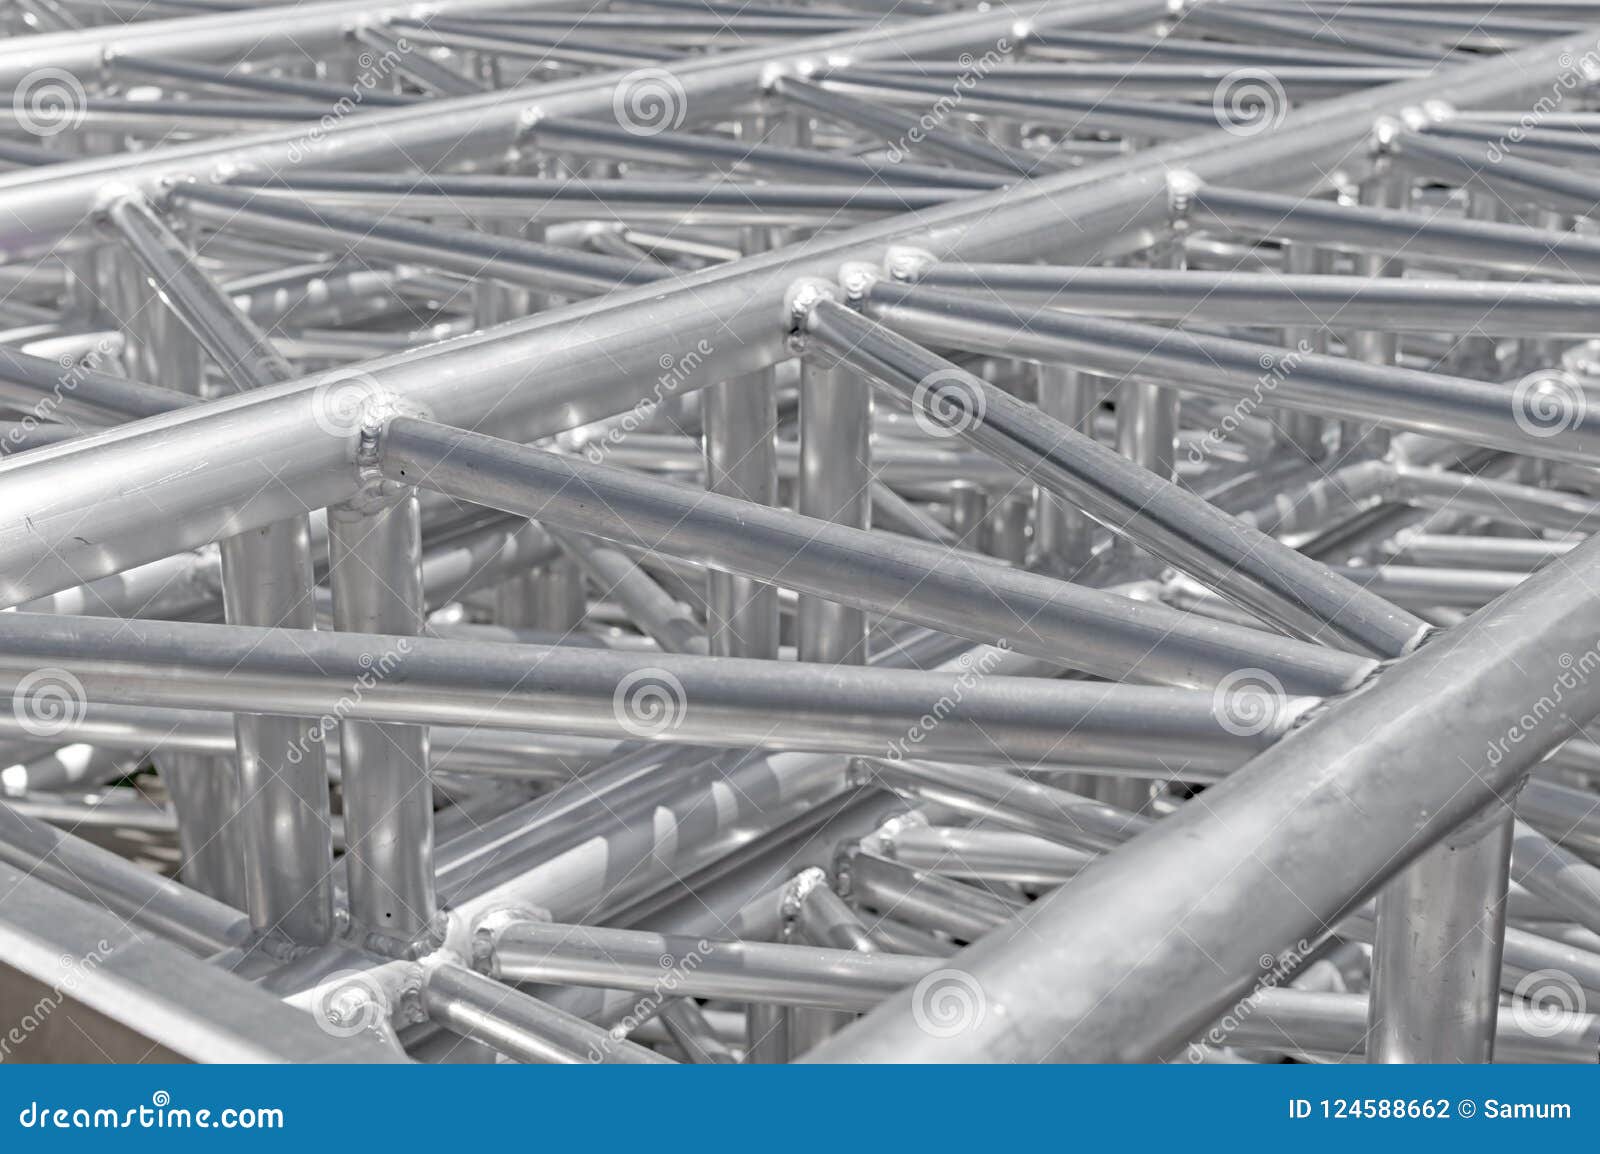 stack of metal trusses for mounting the stage